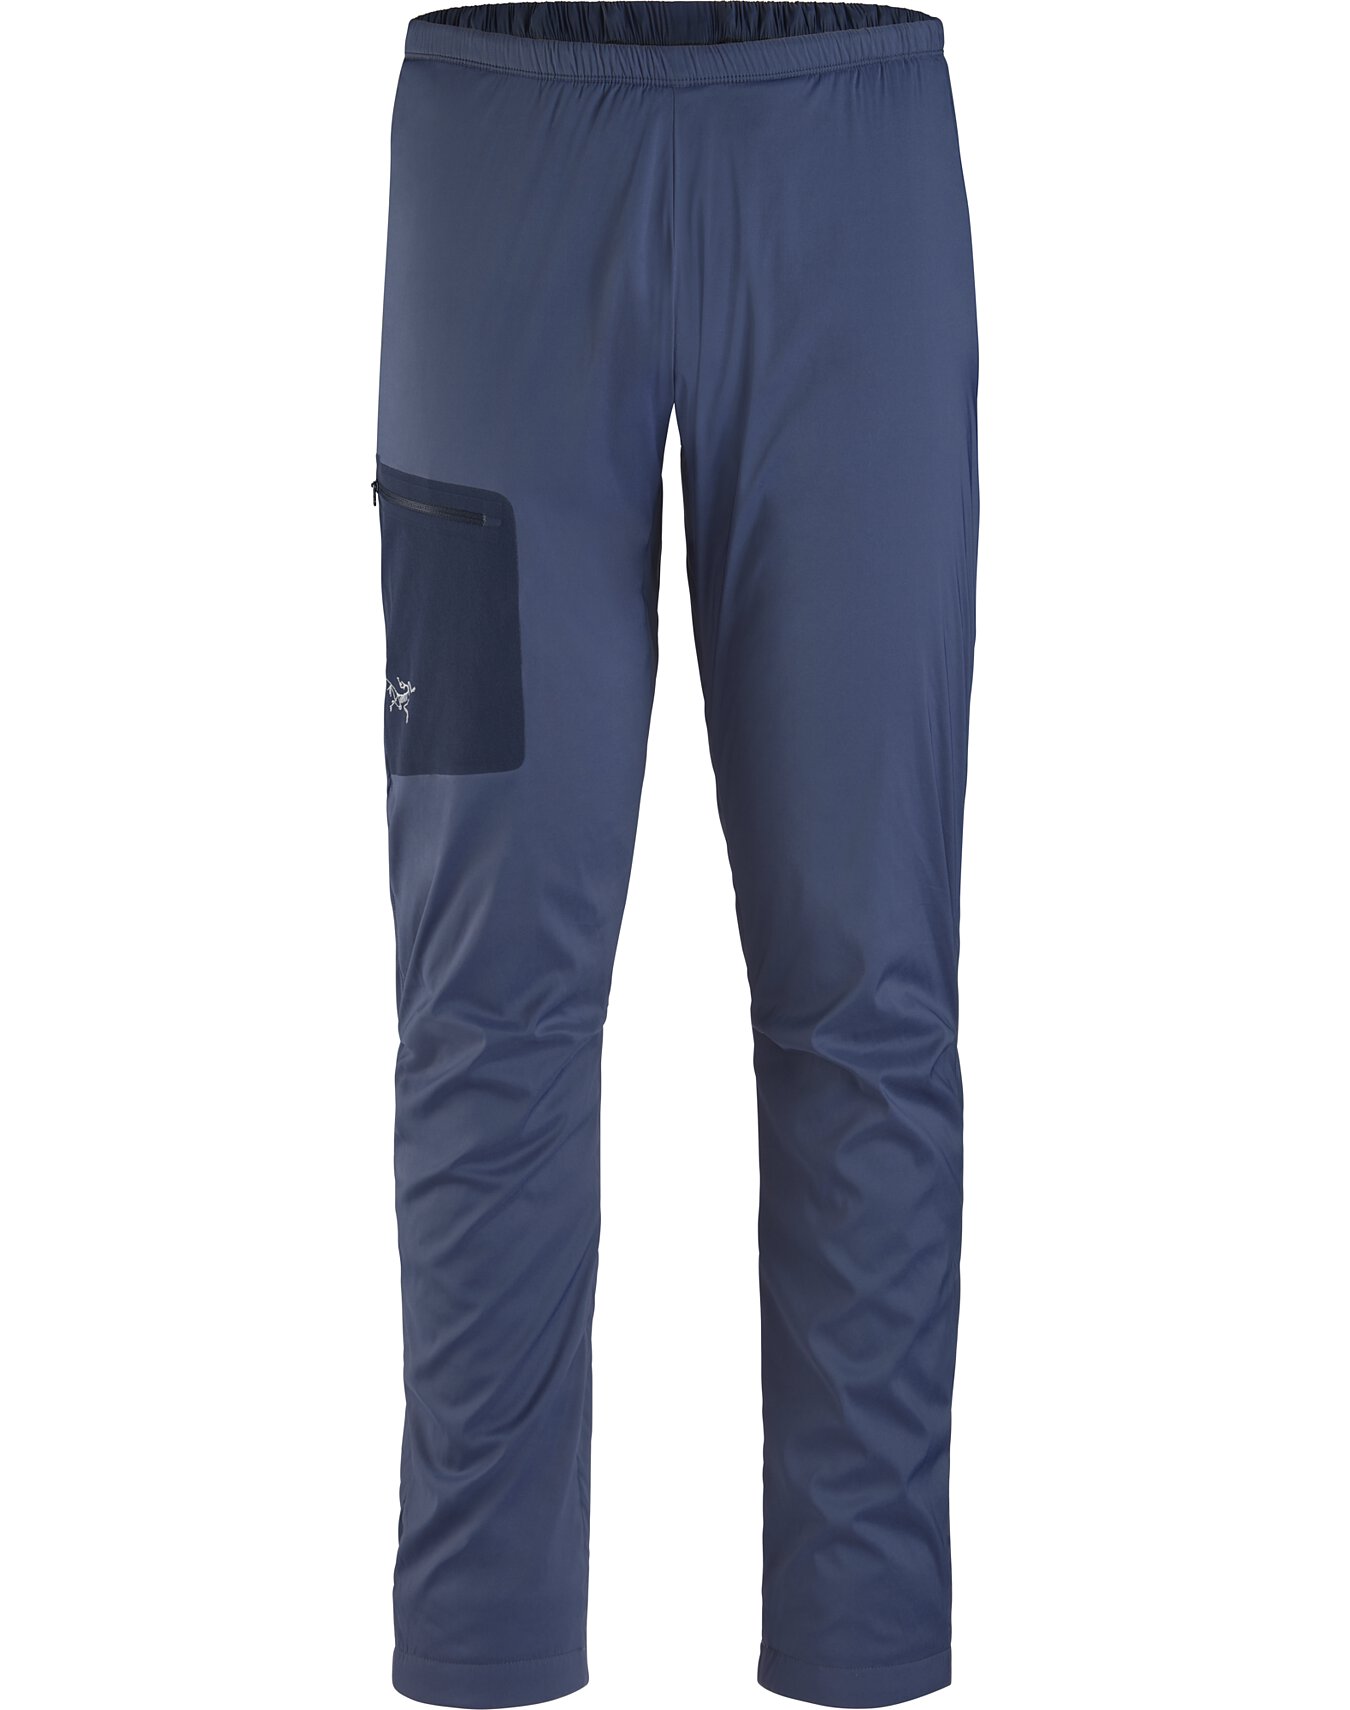 thermal insulated pants